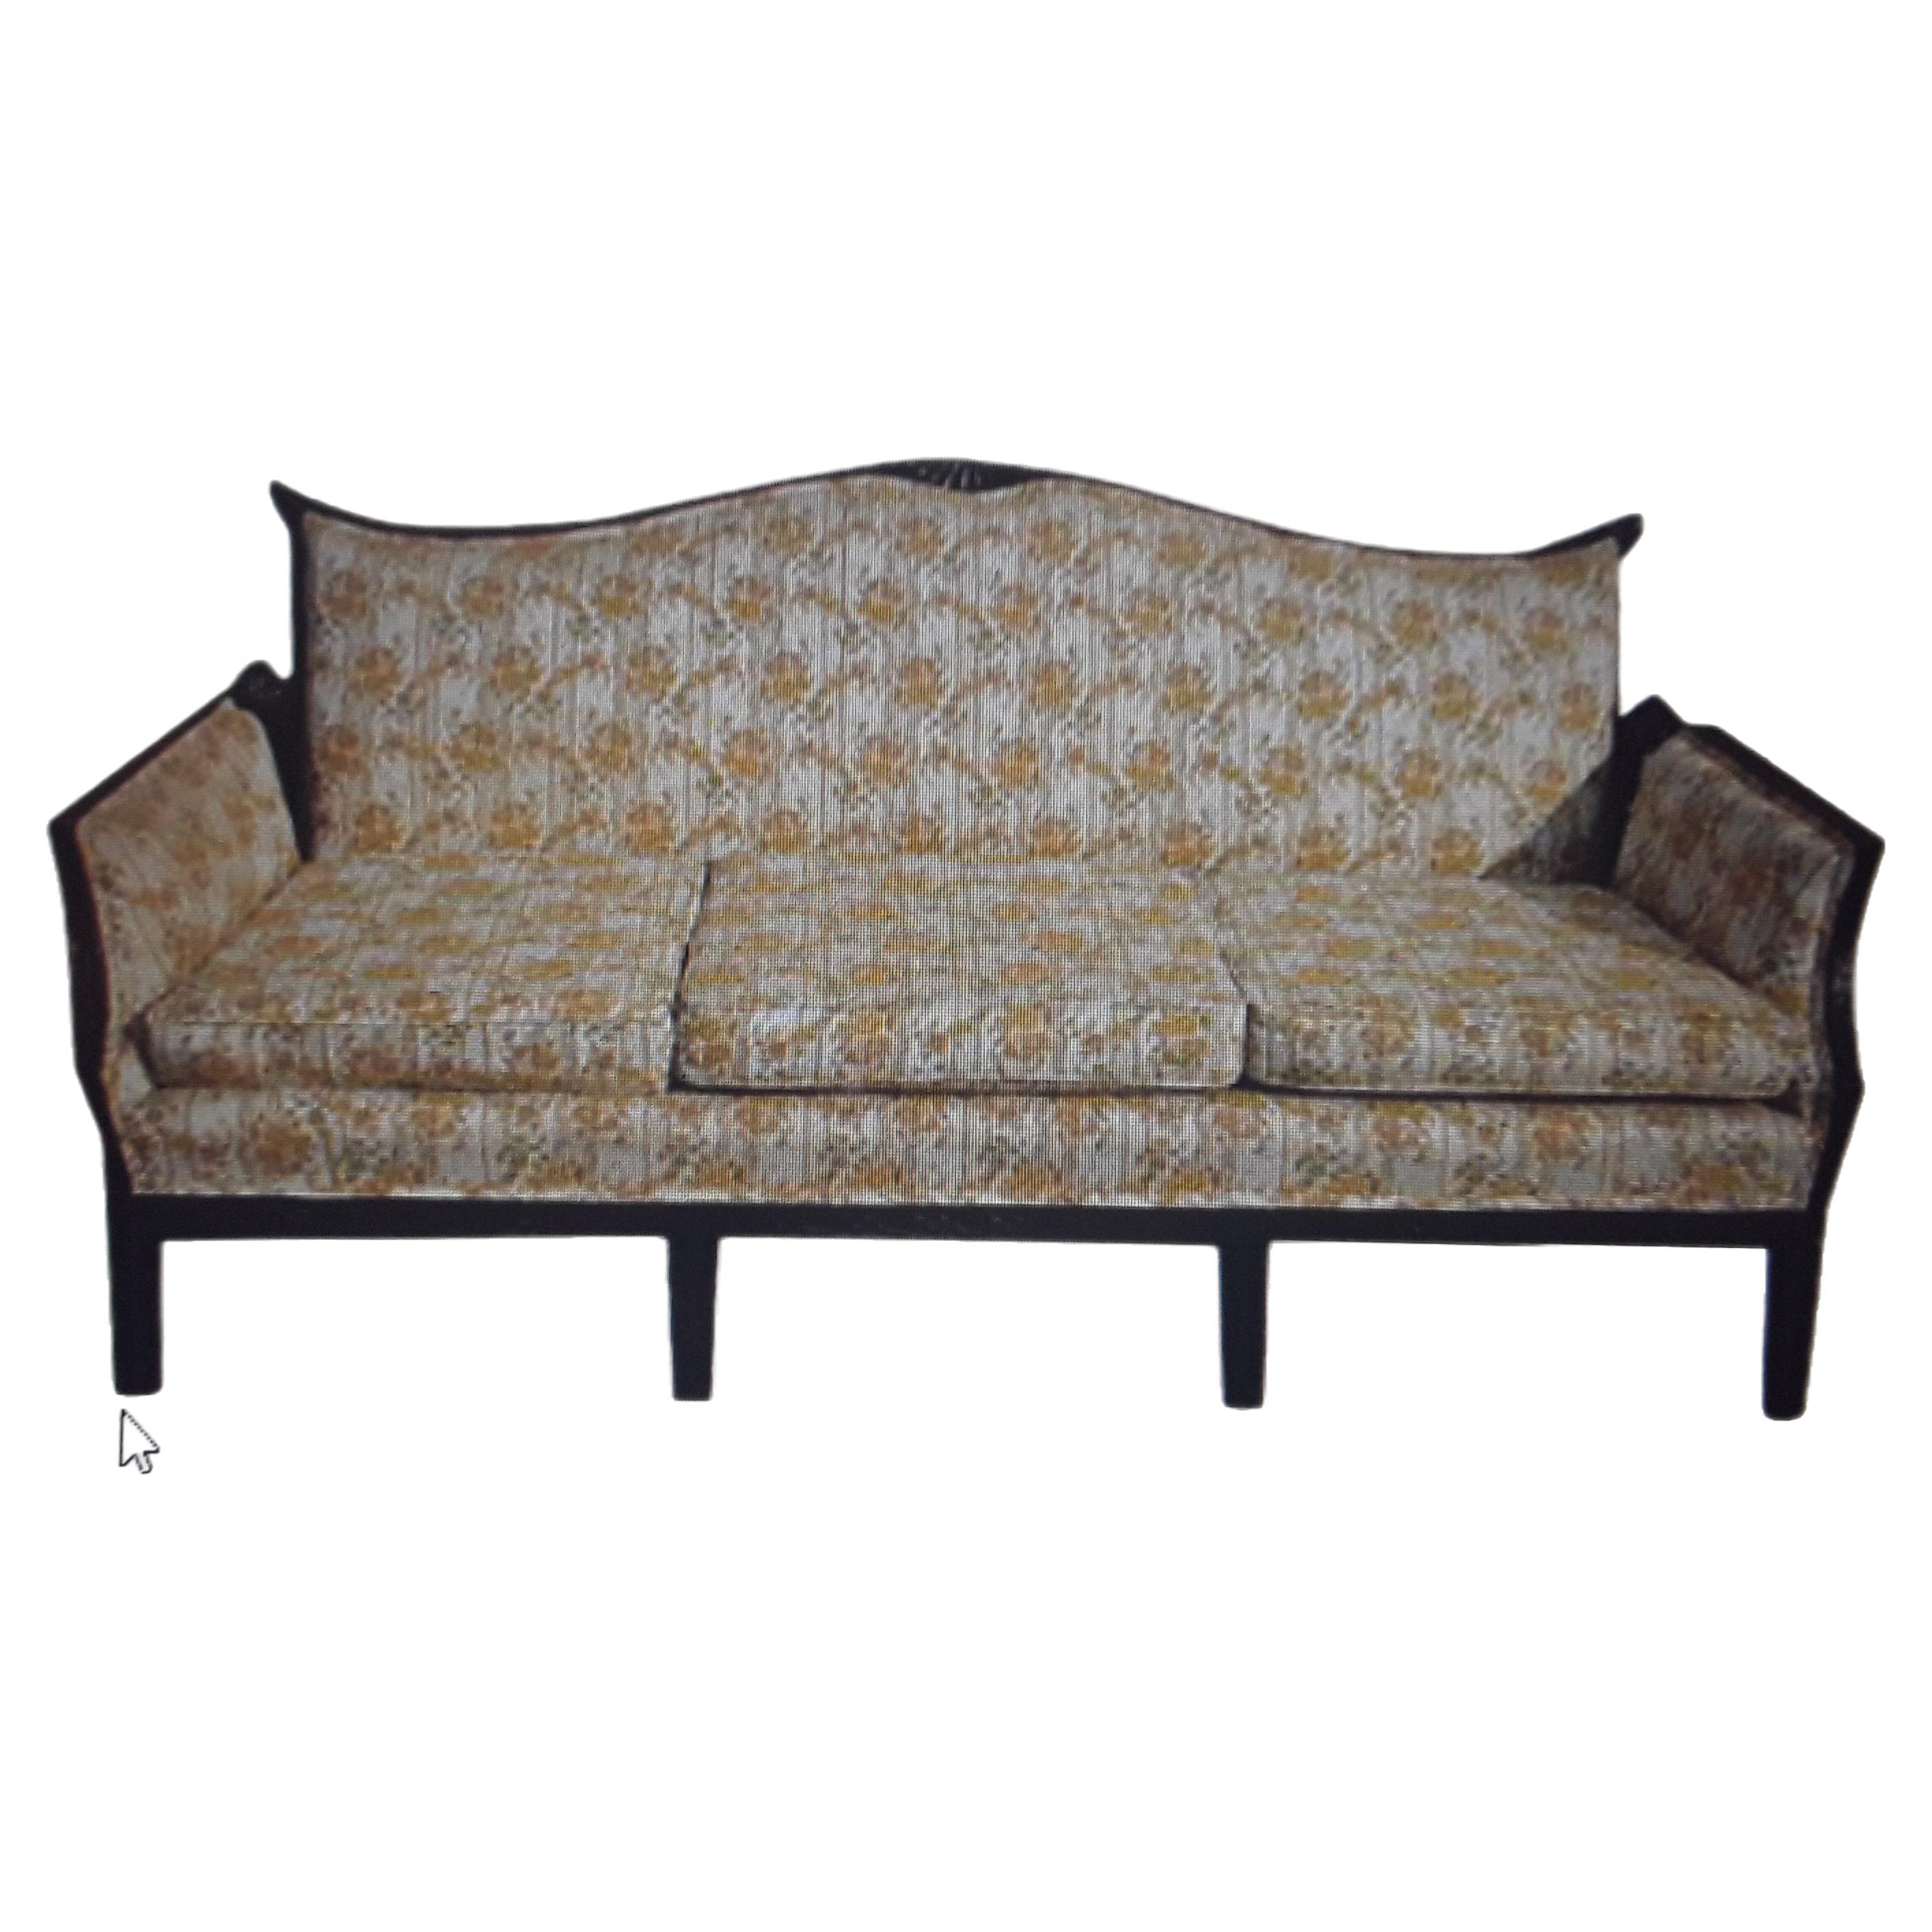 1940's Hollywood Regency Chinoiserie Expertly Carved Grand Sofa. Please look at pictures closely, all of the wood frame is carved with stunning Asian motif. Very high quality vintage fabric in good condition. This sofa came from a very clean estate.